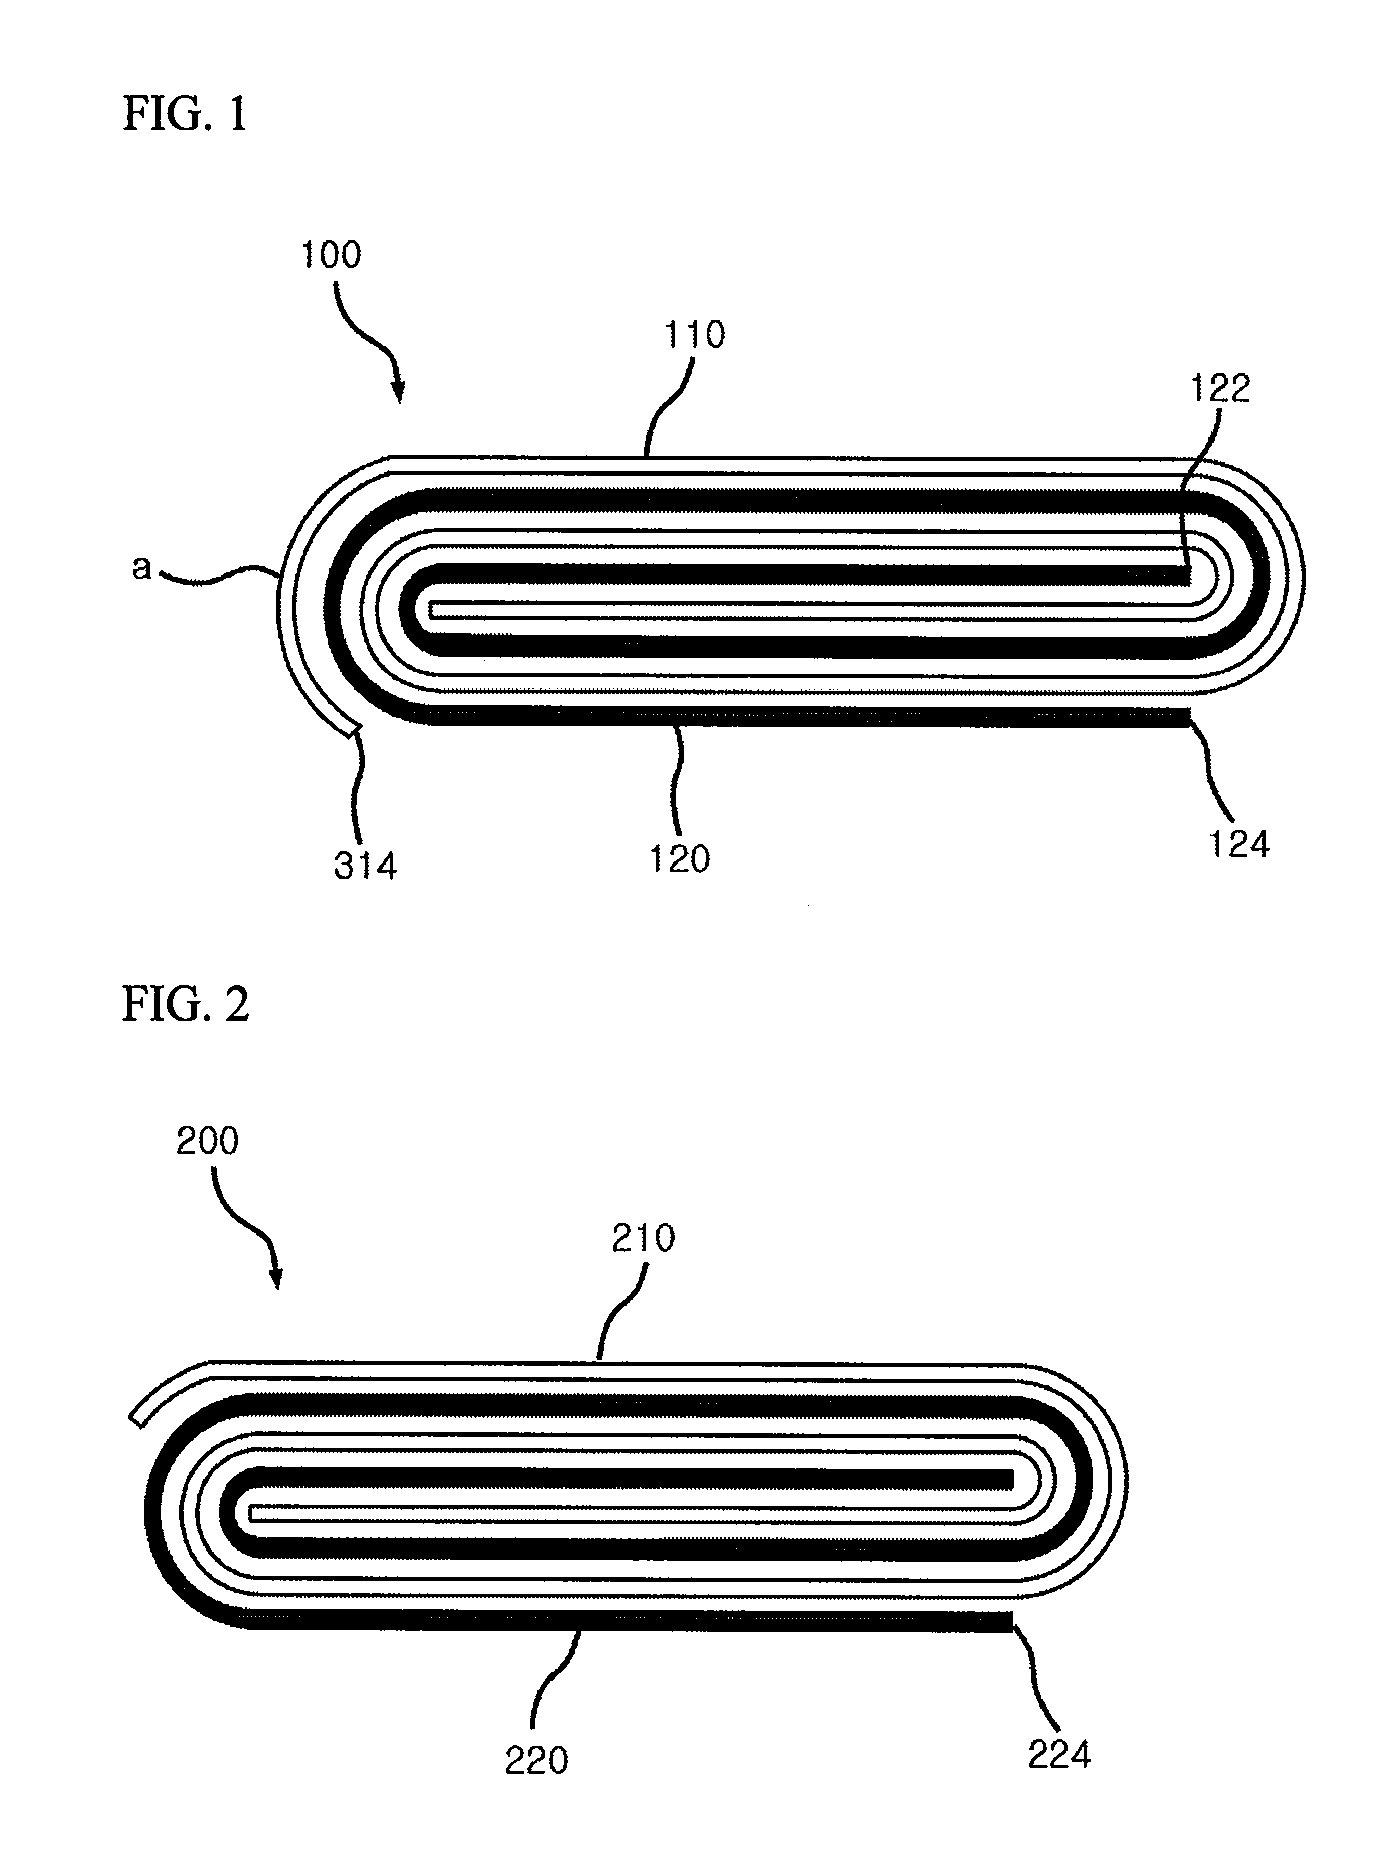 Double winding-typed electrode assembly